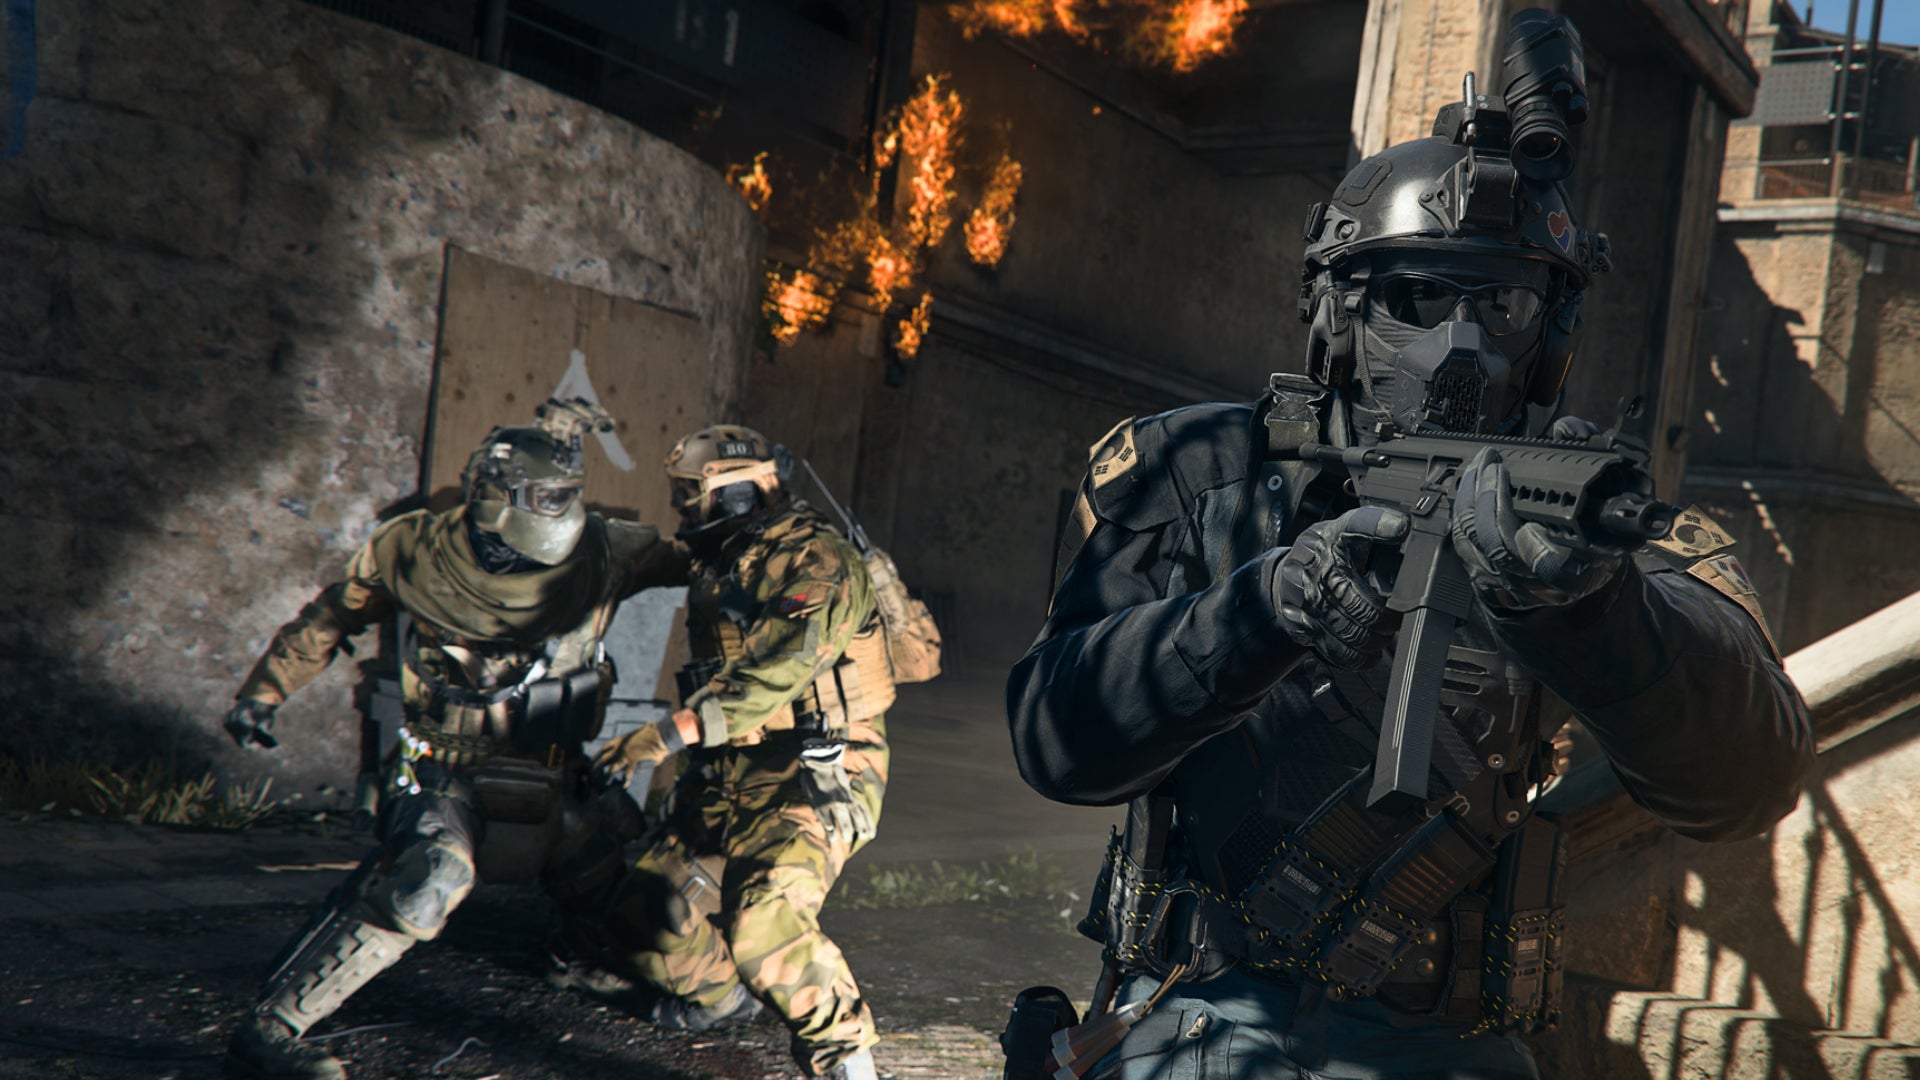 A soldier aims their SMG past the camera while two more soldiers have a knife-fight behind them in Warzone 2.0.